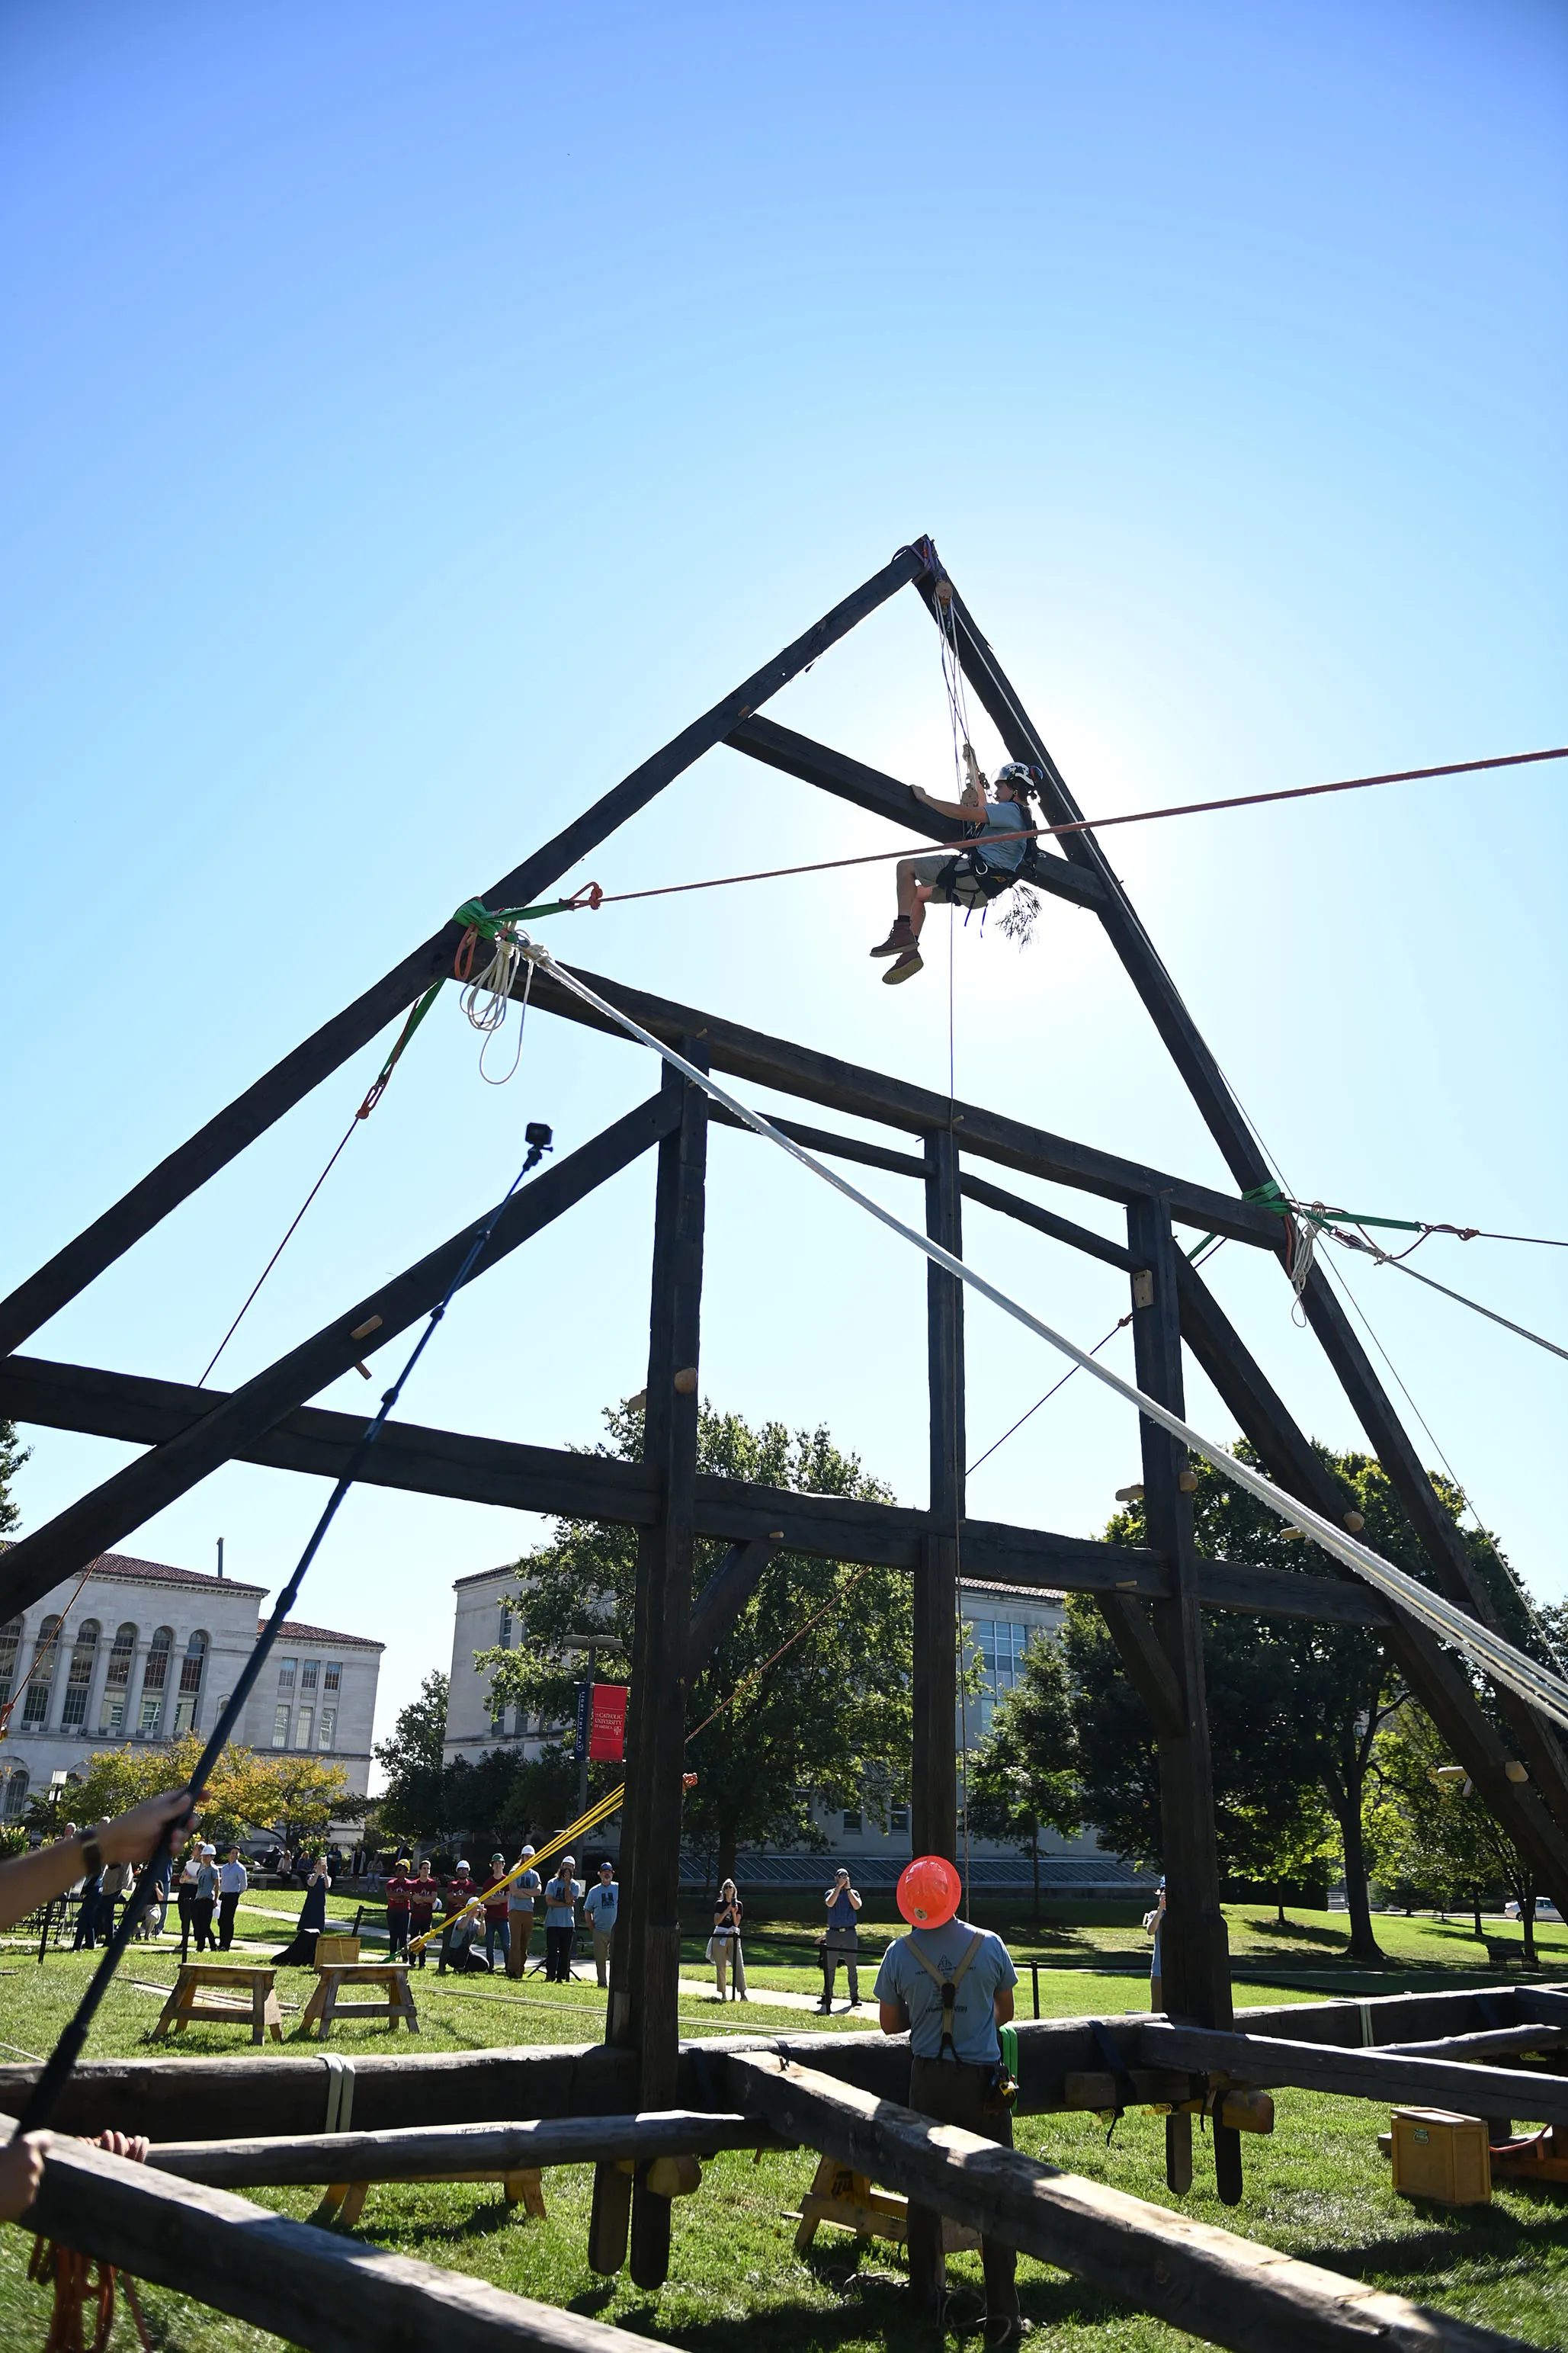 A builder climbs the replica Notre-Dame de Paris truss to secure a sharp, or evergreen, bush atop in celebration at the Catholic University of America in Washington, DC, September 26, 2022. Patrick G. Ryan